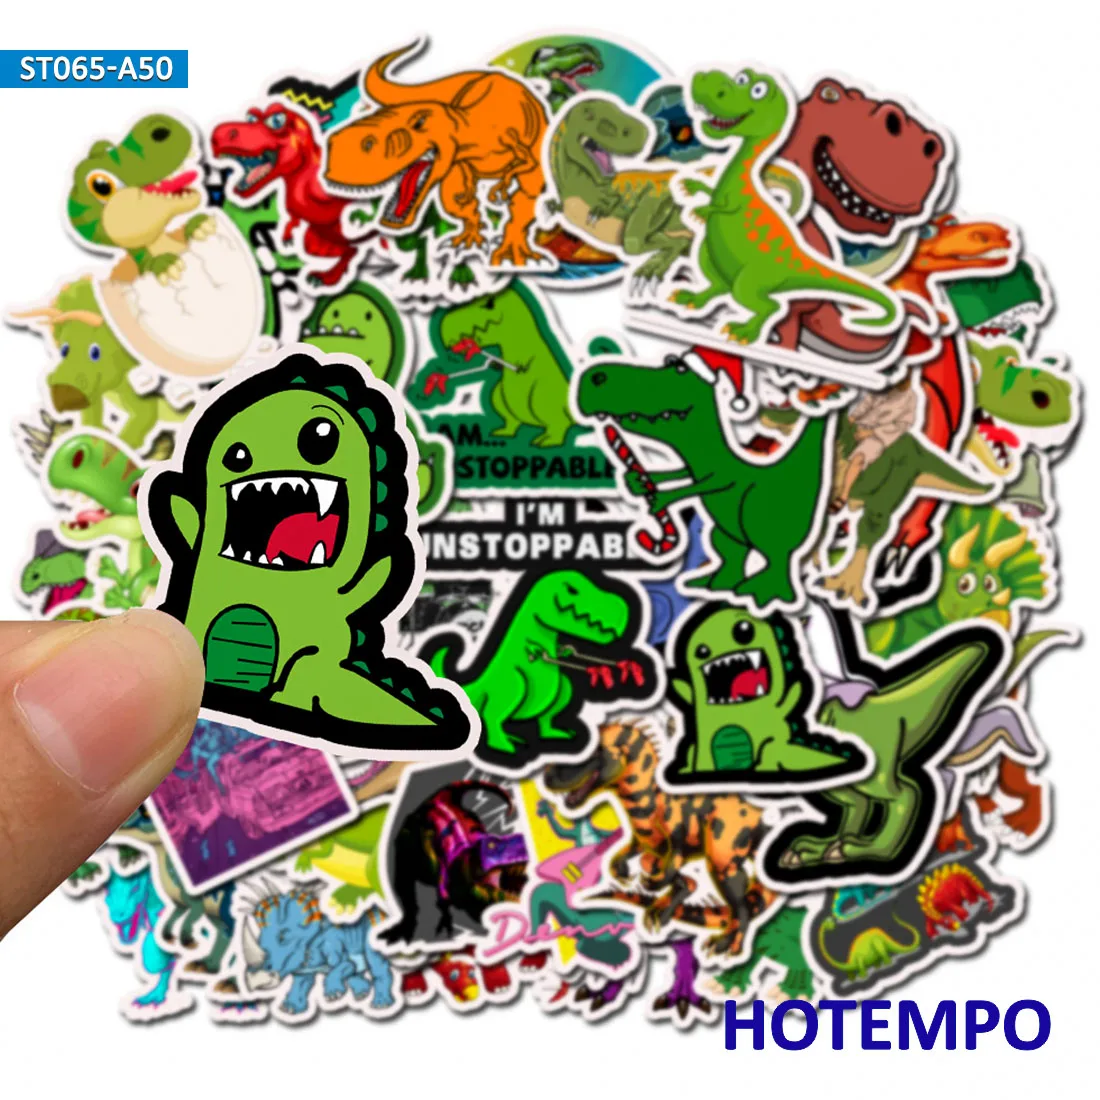 50pcs Cute Dino Anime Dinosaur Stickers for Boy Children Kids Gift Scrapbooking Stationery Mobile Phone Laptop Cartoon Stickers